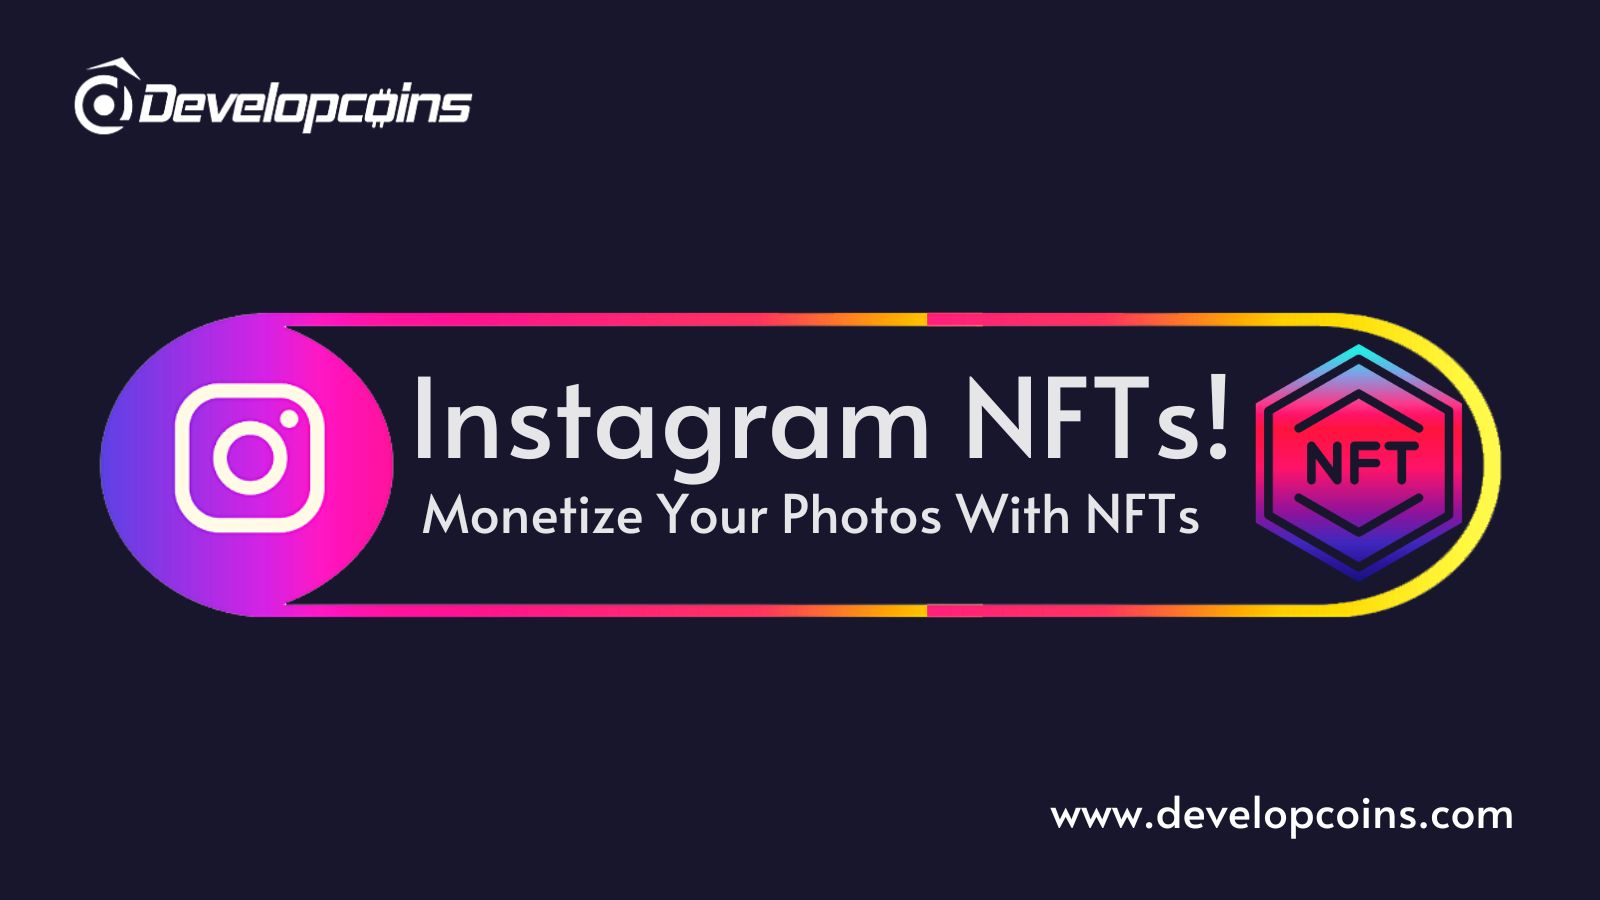 Are you An Instagram User? Now You Can Earn High With Instagram NFTs!!